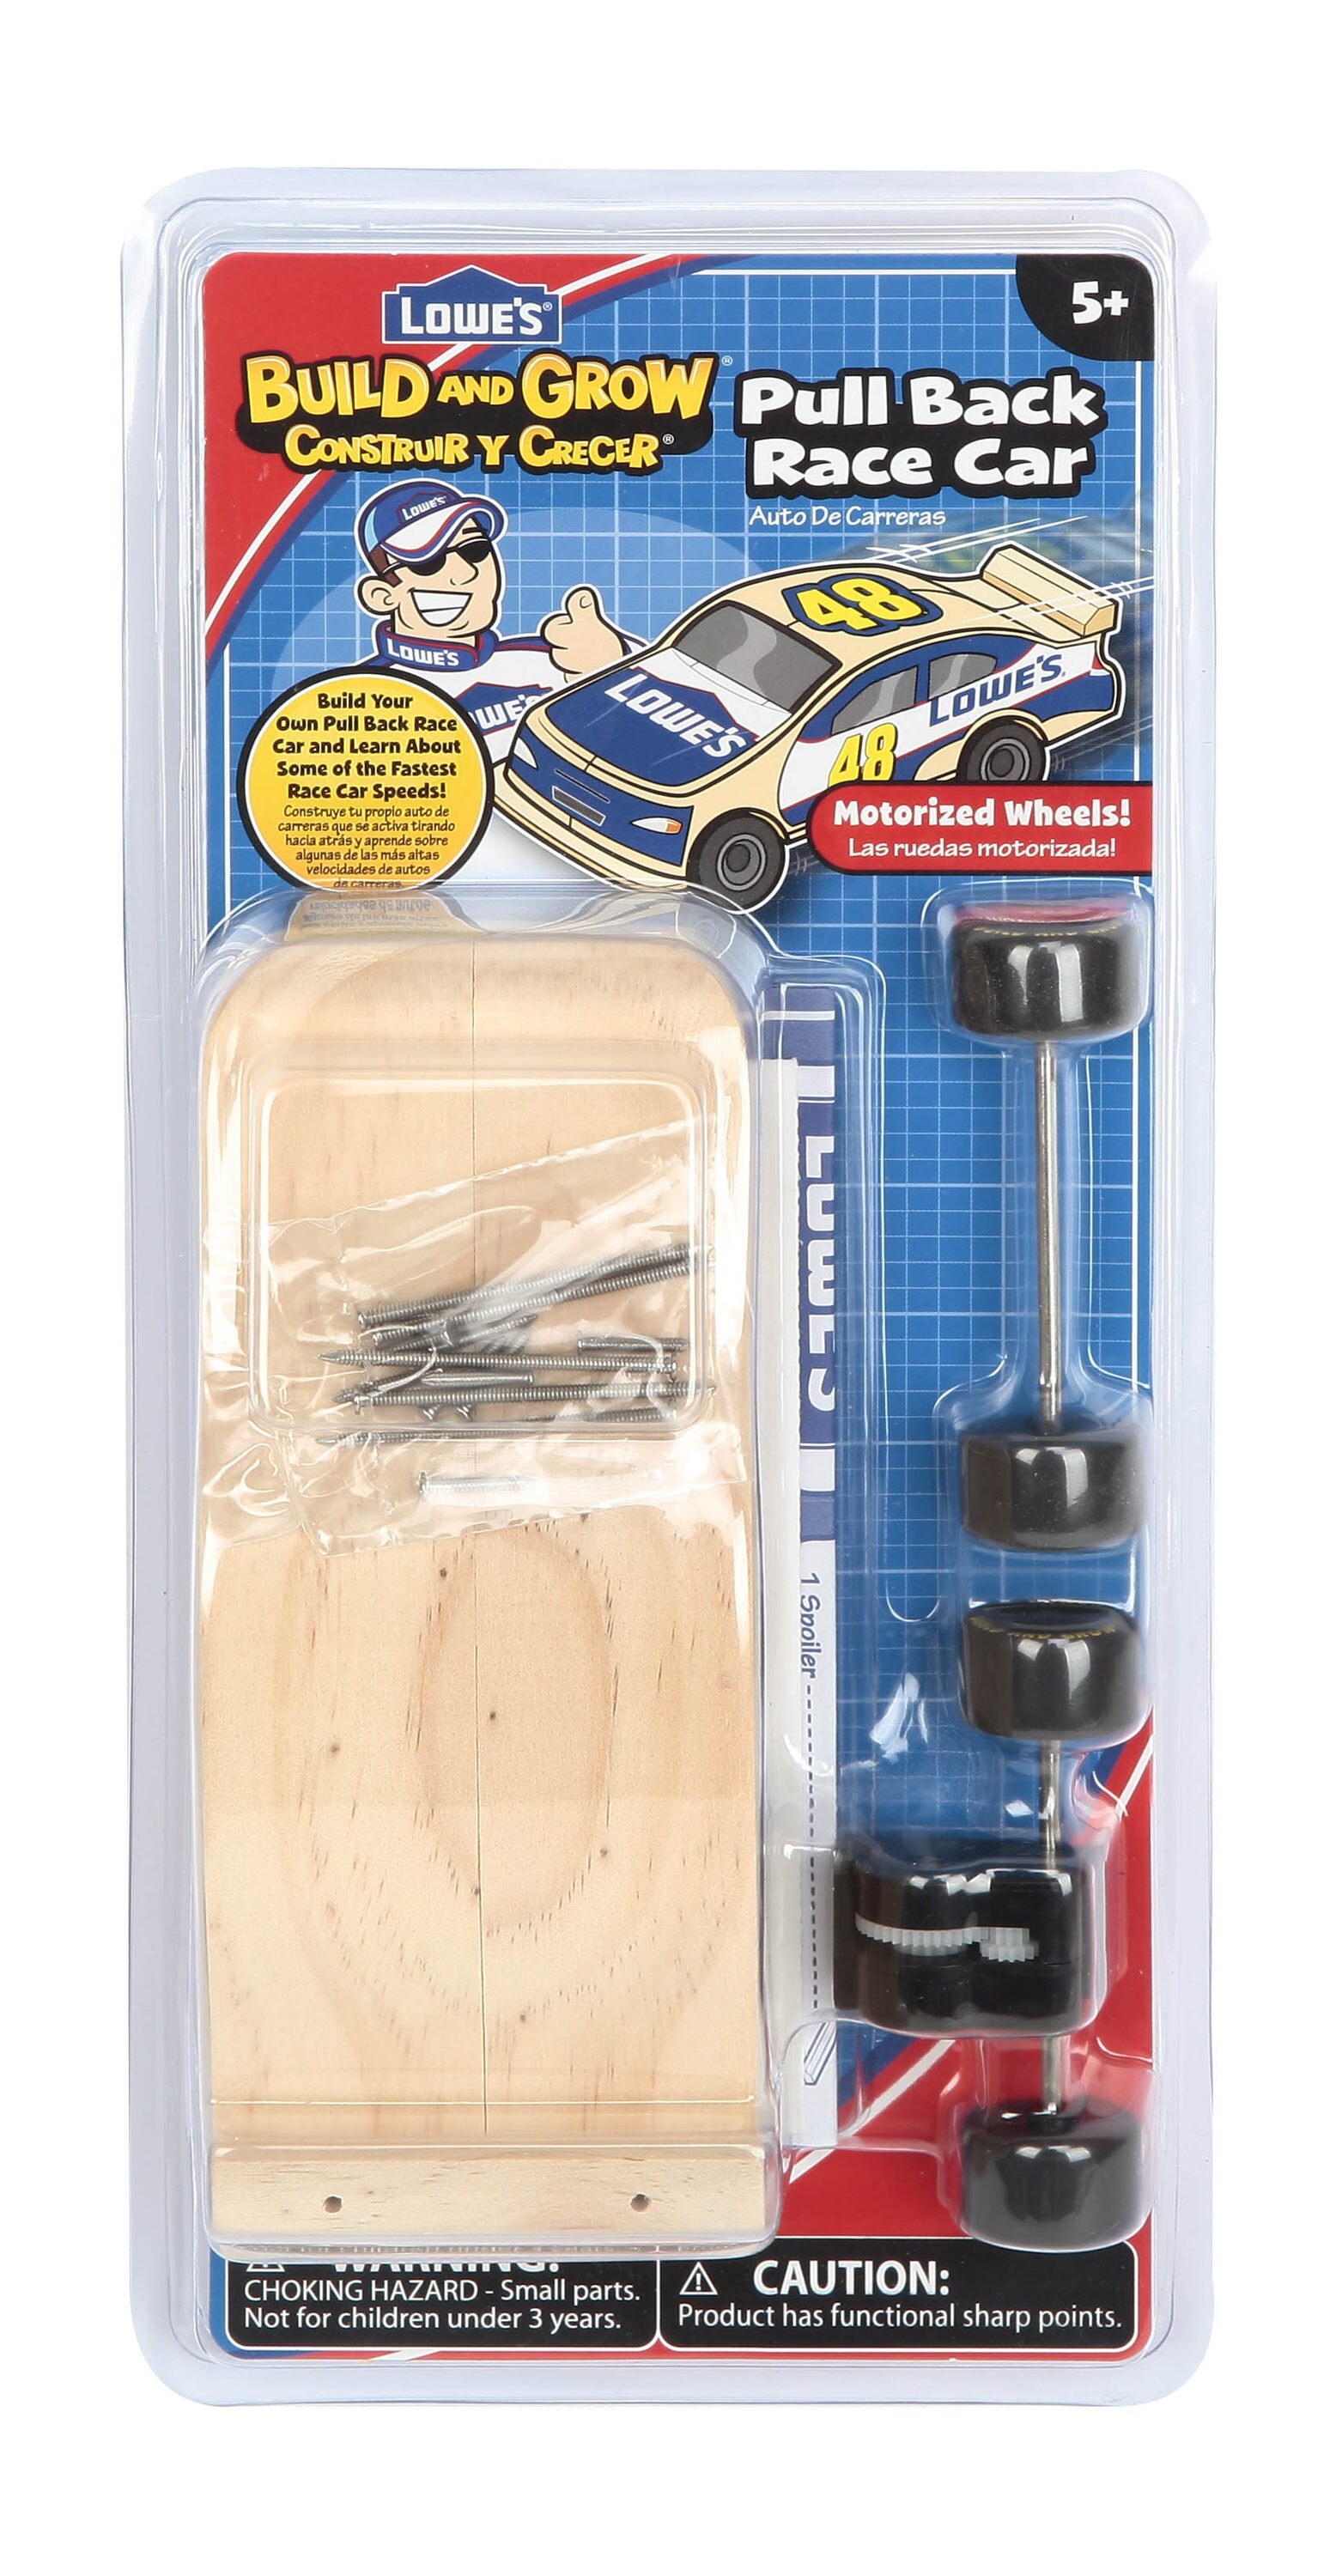 Lowes Build and Grow Wooden Pull Back Race Car With Motorized Wheels for sale online